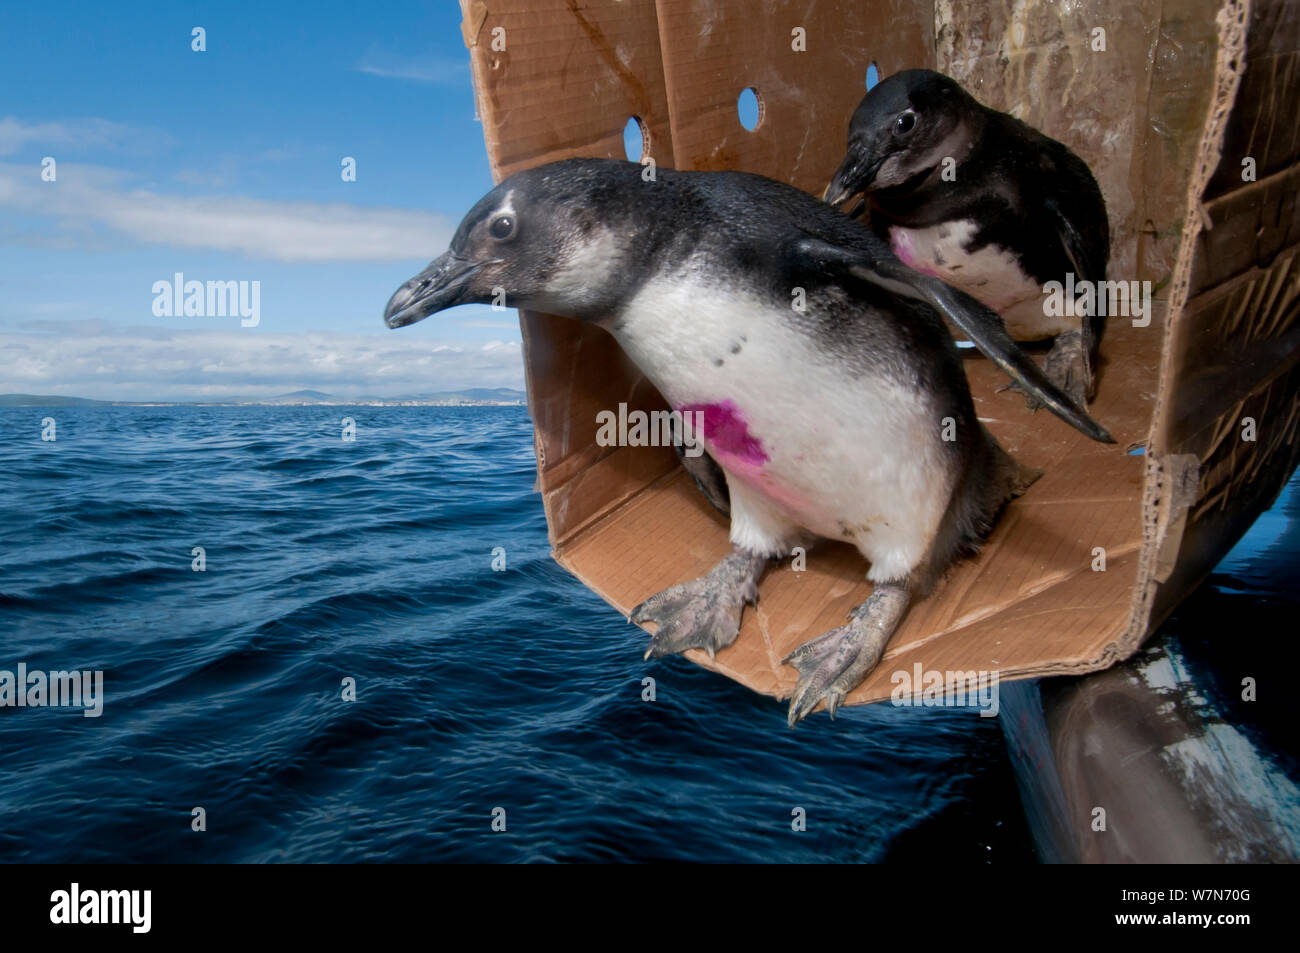 Black footed penguins (Spheniscus demersus) being released at sea near Robben Island, Table Bay after rehabilitation at Southern African Foundation for the Conservation of Coastal Birds (SANCCOB) Cape Town, South Africa 2010 Stock Photo